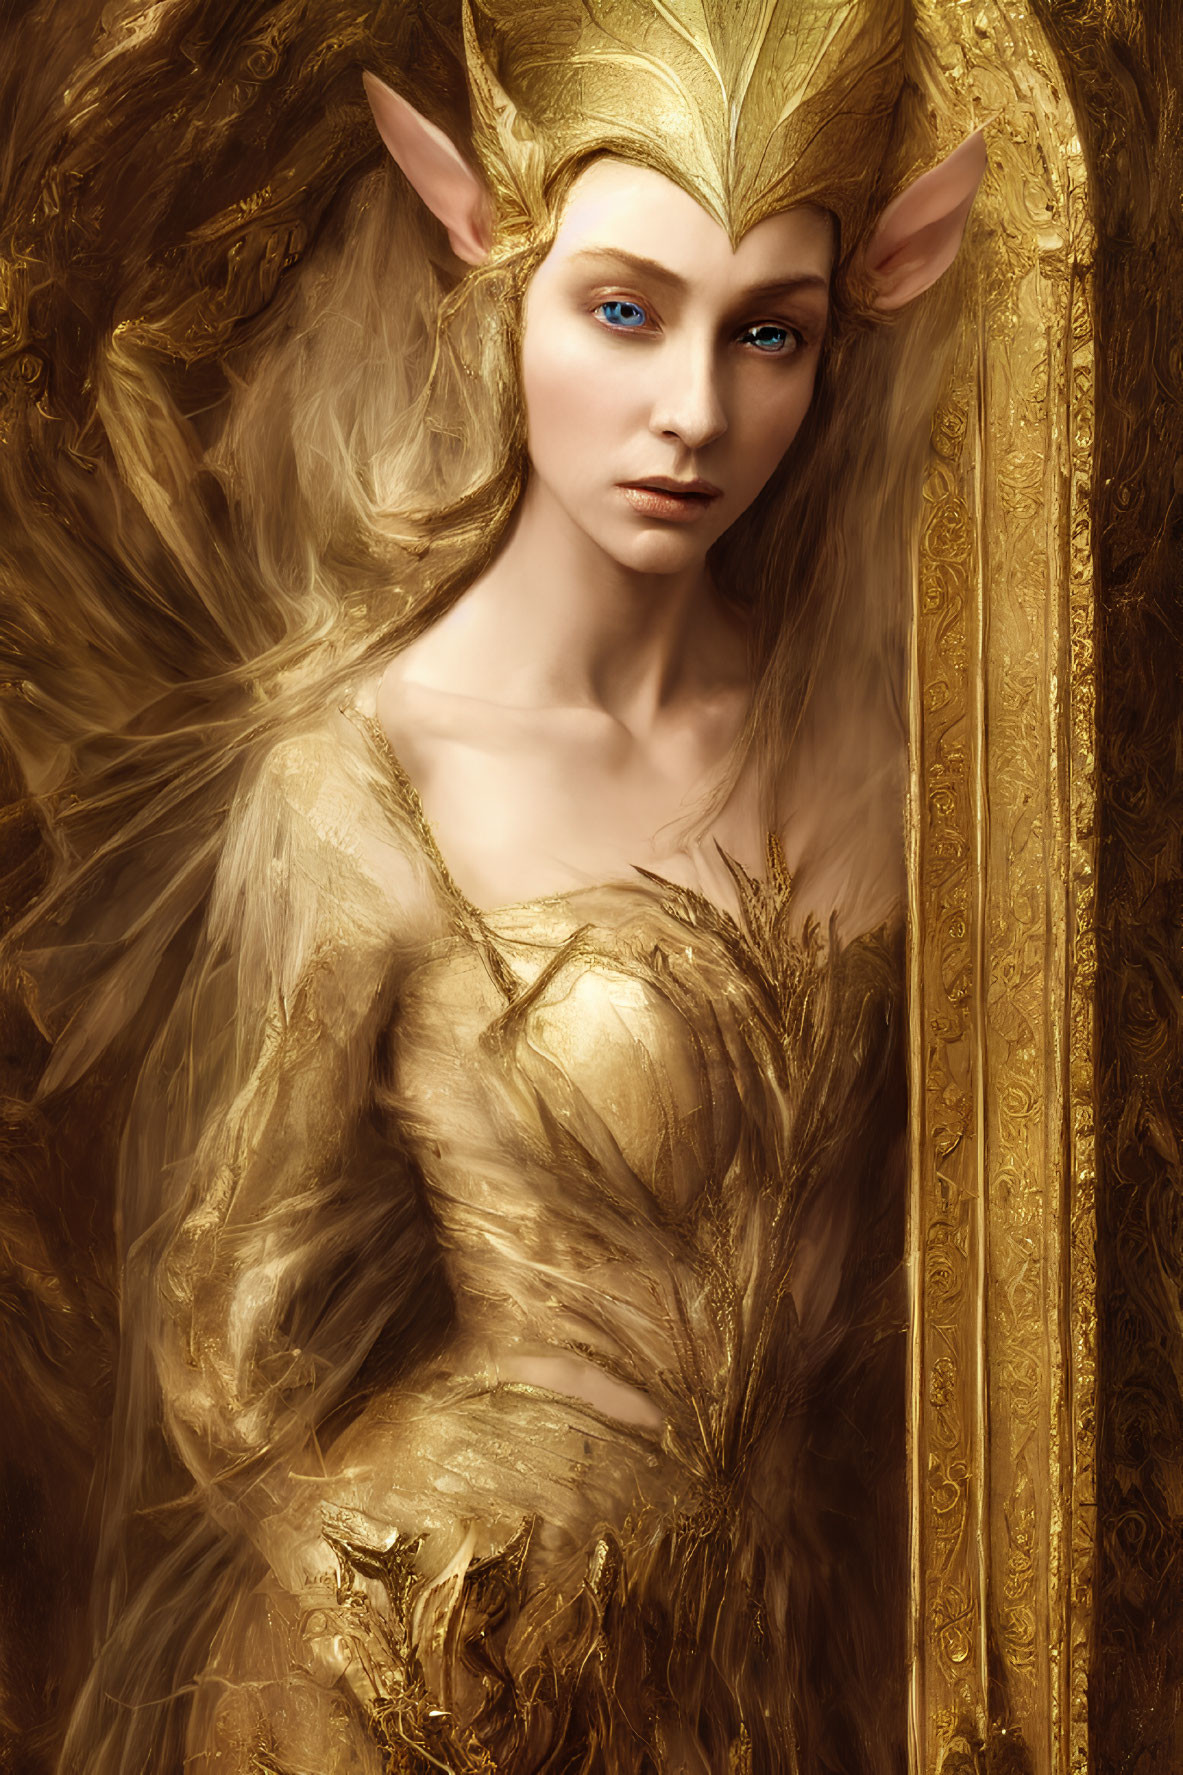 Golden attire and headpiece on ethereal being with pointed ears and deep blue eyes - royal fantasy elf